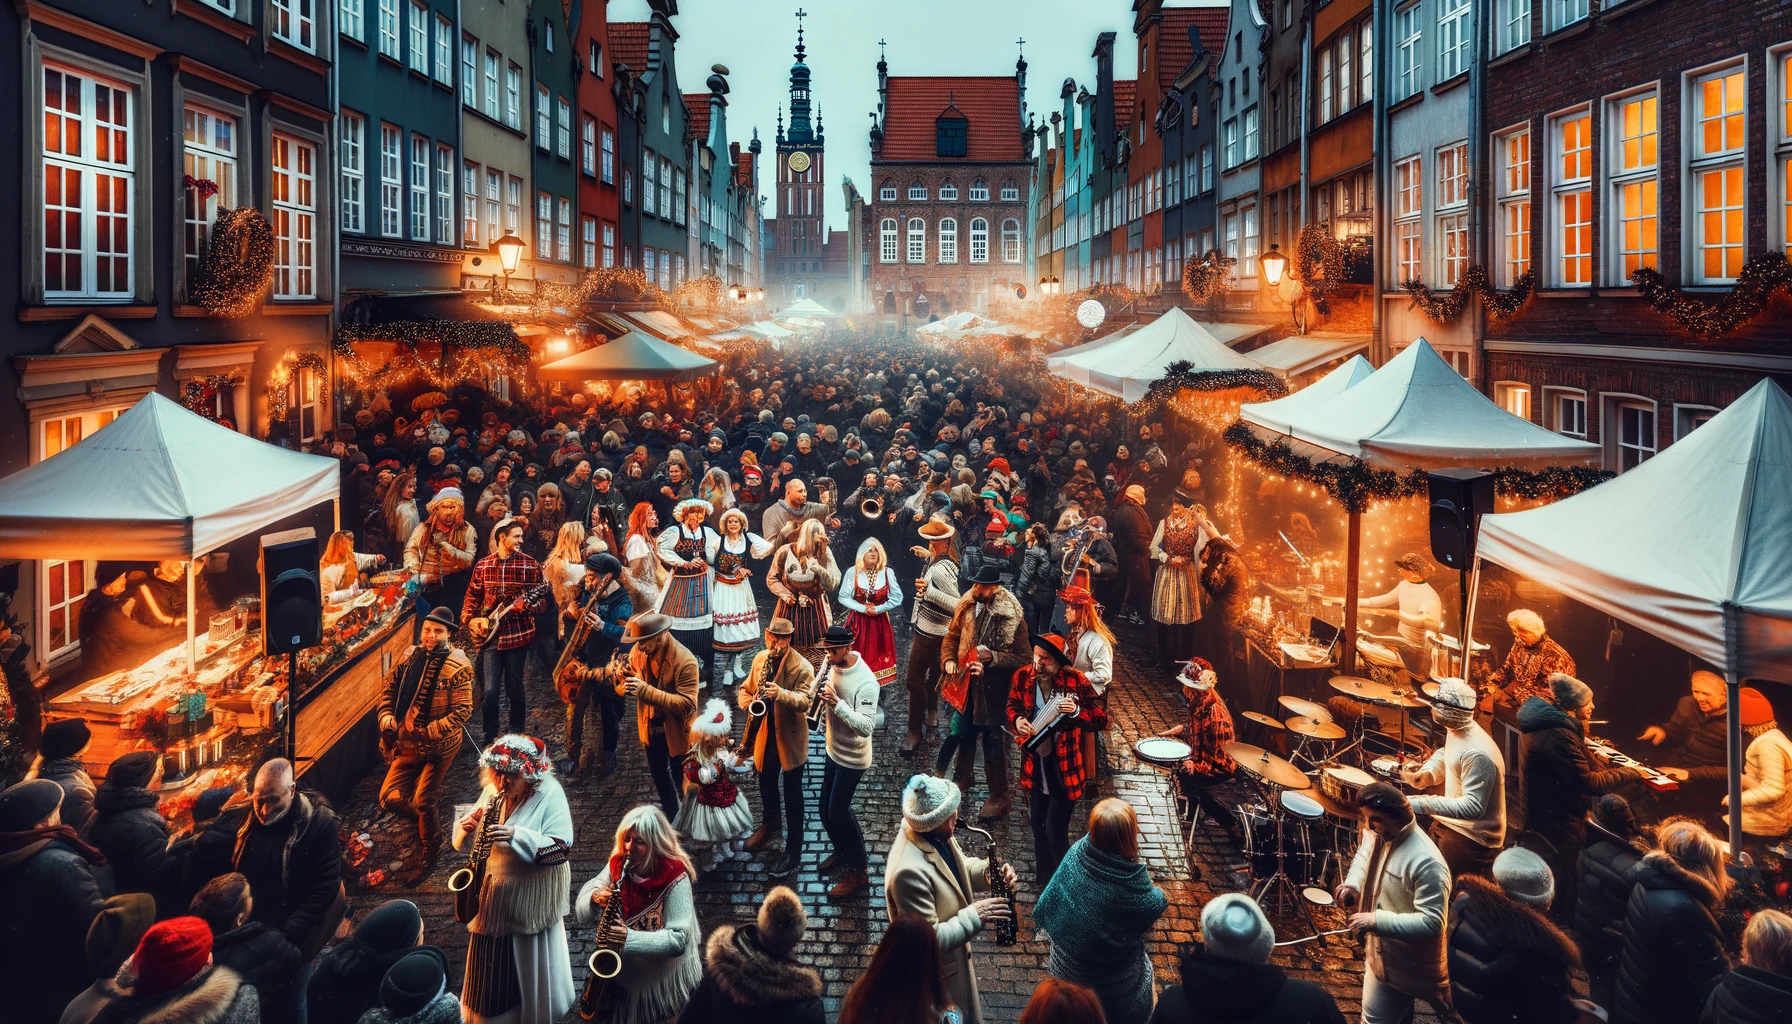 Vibrant Street Party Celebrations in Gdansk's Old Town During New Year's Eve